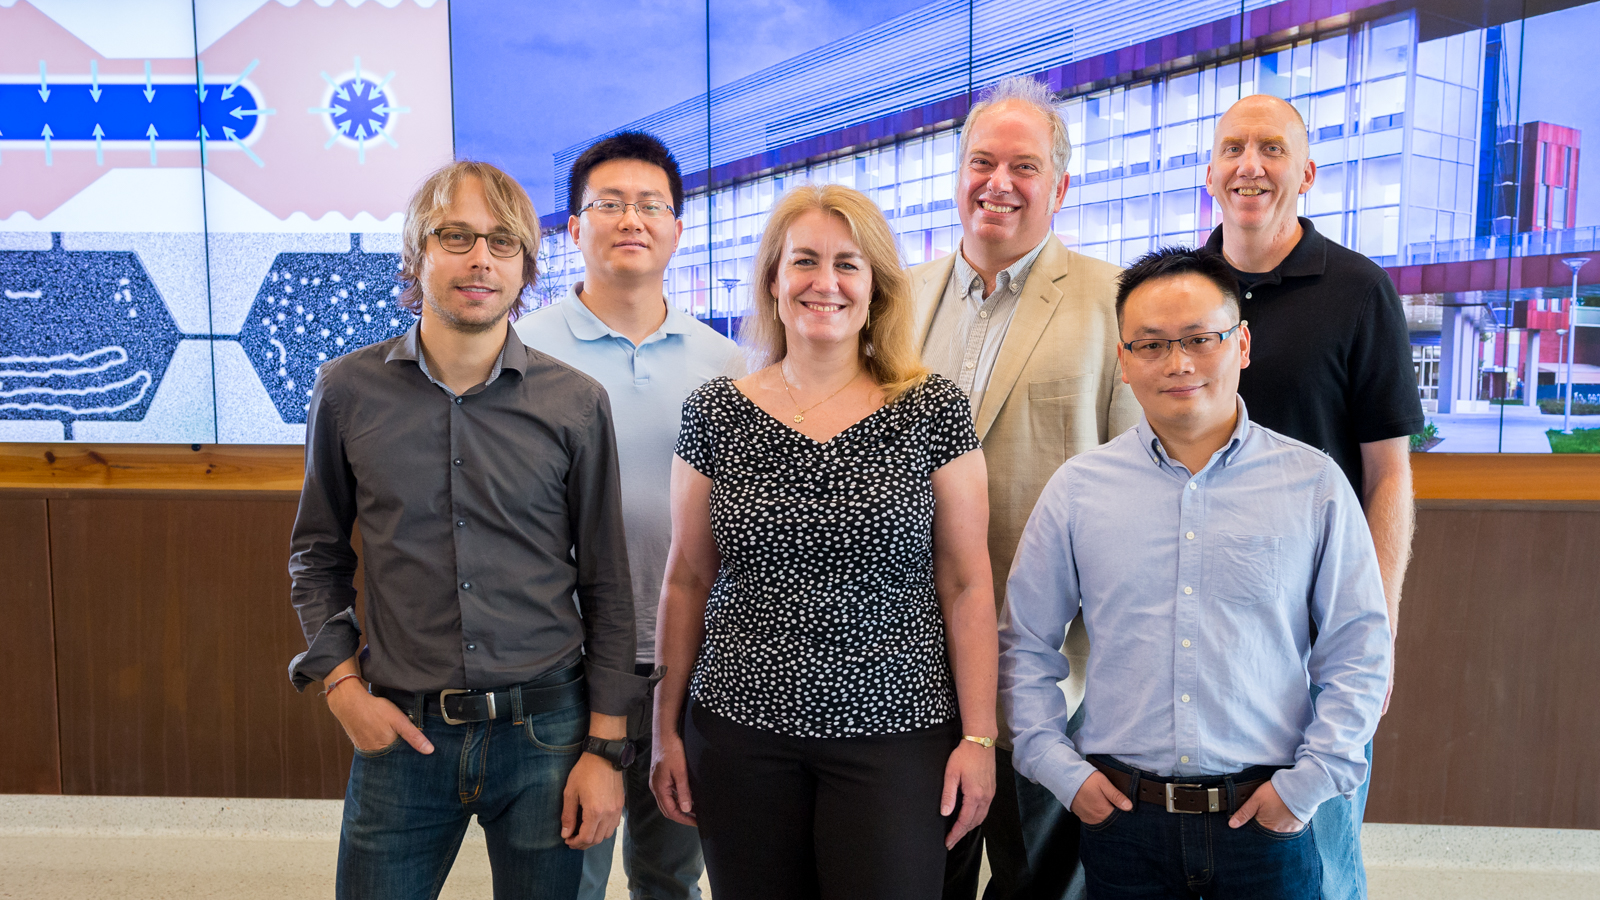 From left to right: M. Benjamin Jungfleisch, Wei Zhang, Suzanne G. E. te Velthuis, Axel Hoffmann, Wanjun Jiang, and John E. Pearson. Photo by Mark Lopez/Argonne National Laboratory.